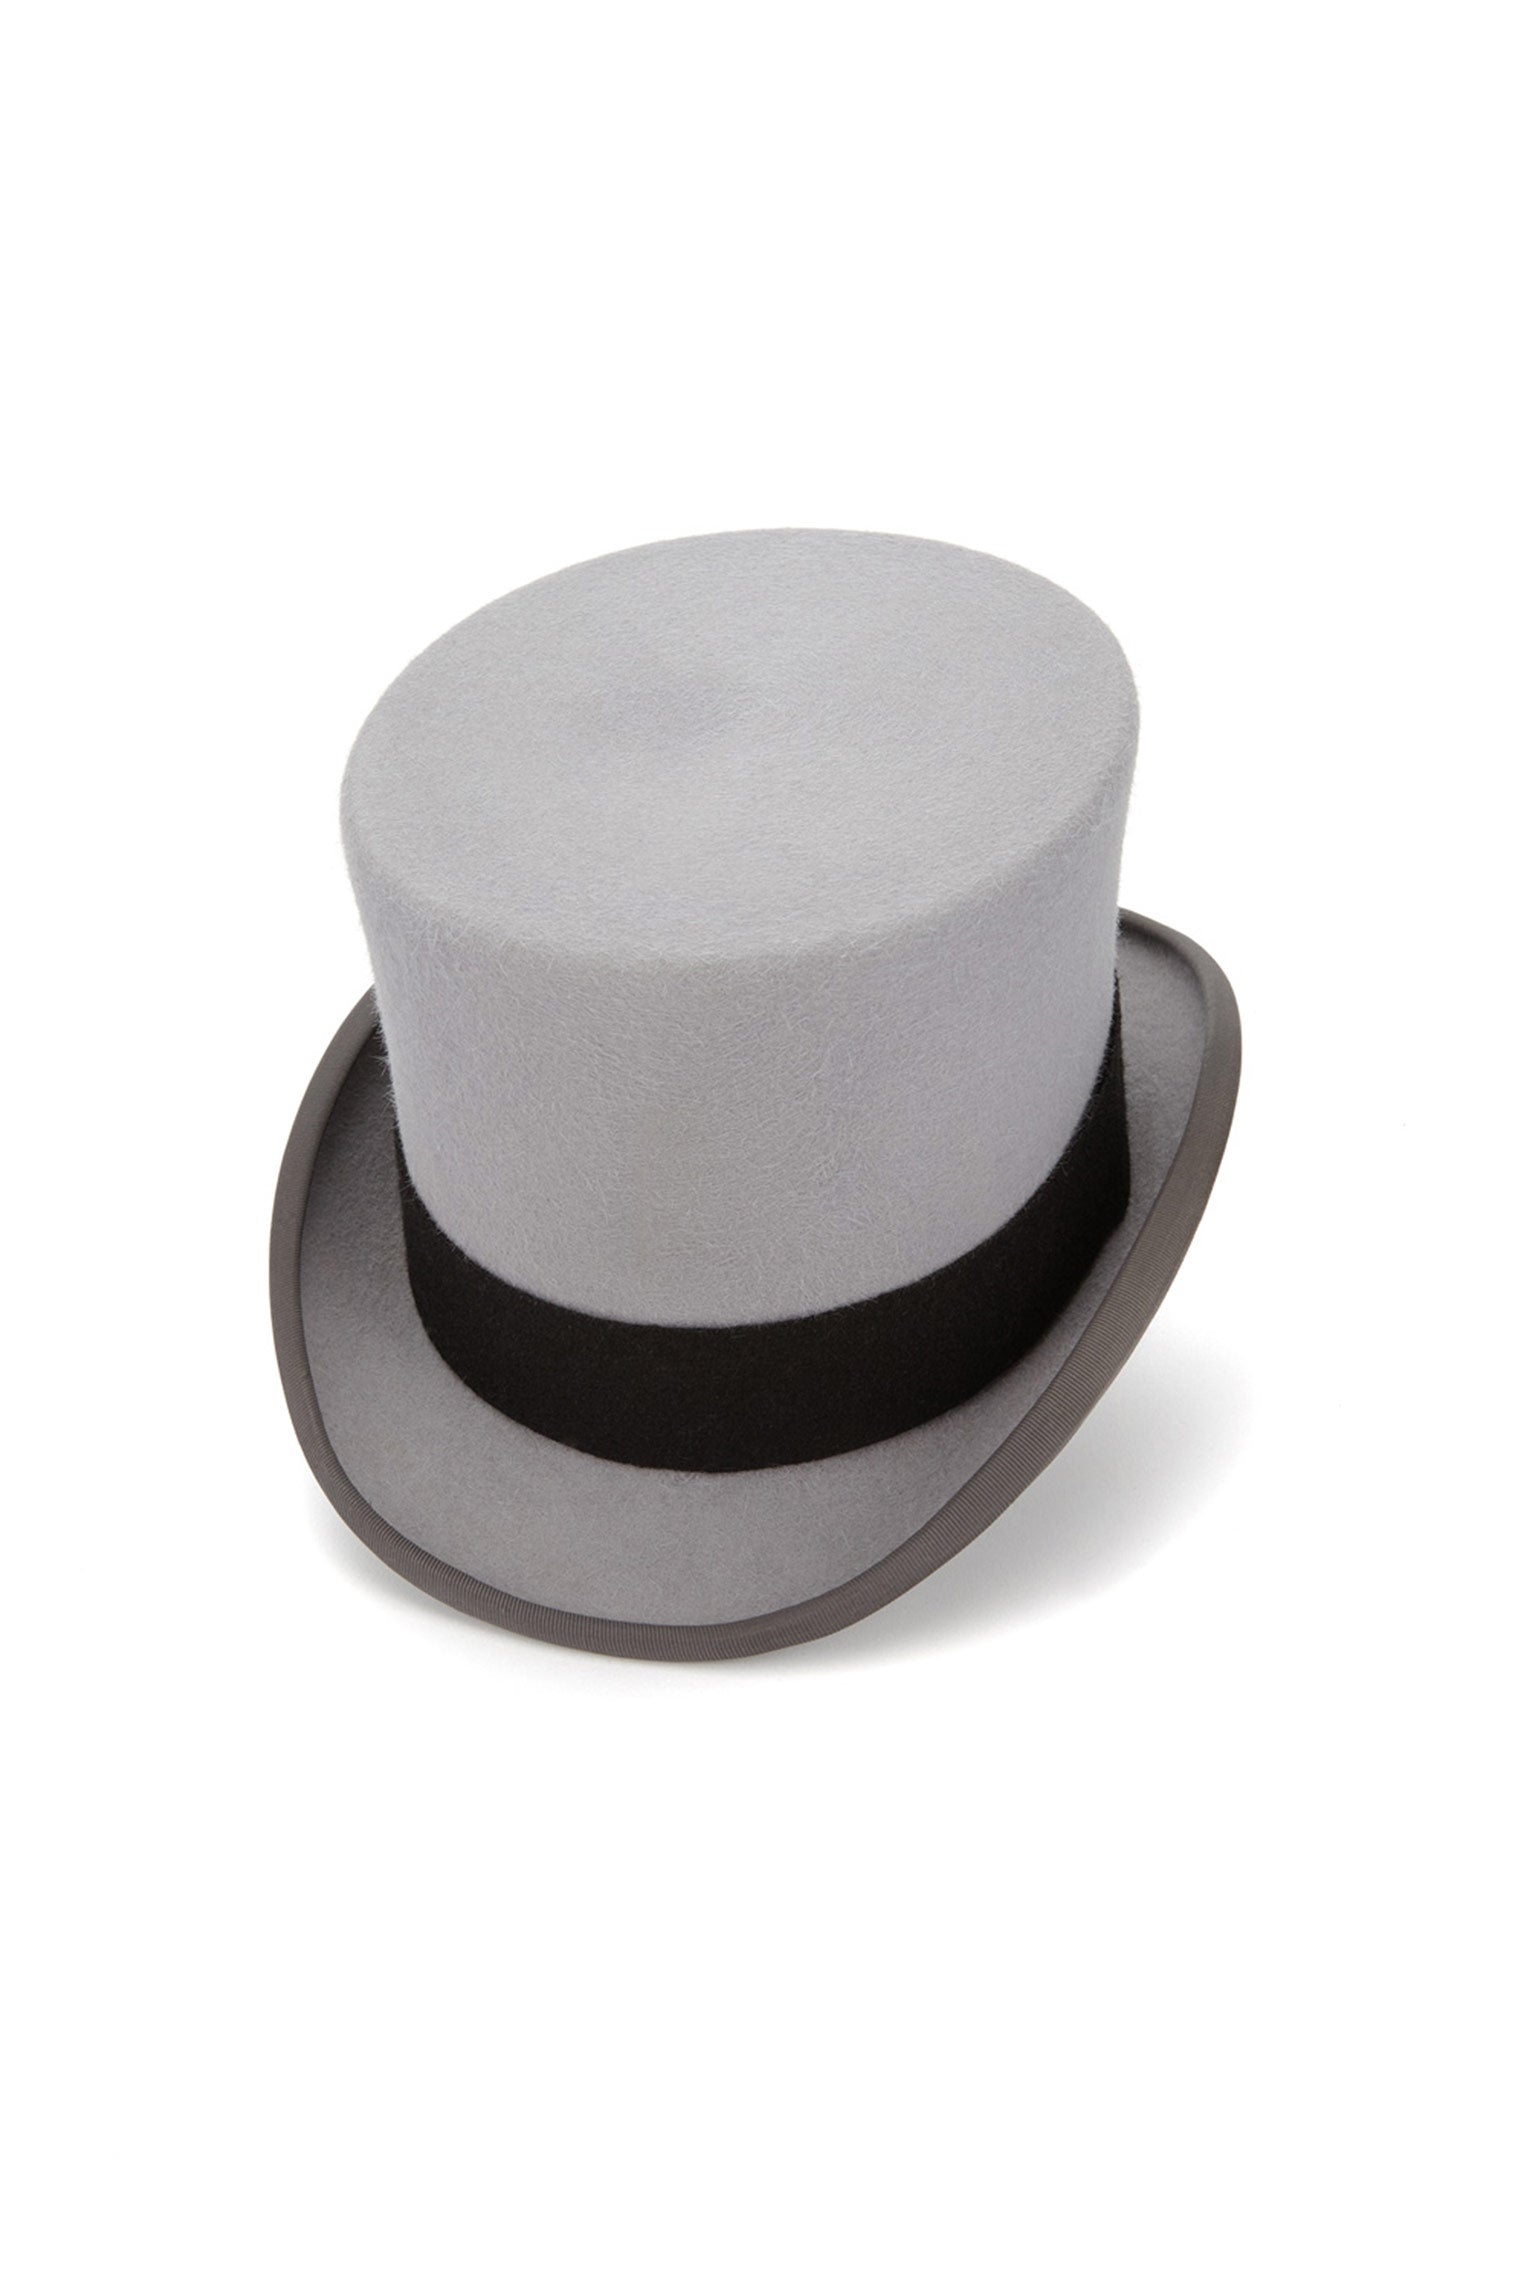 GREY FELT TOP HAT WITH BLACK BAND